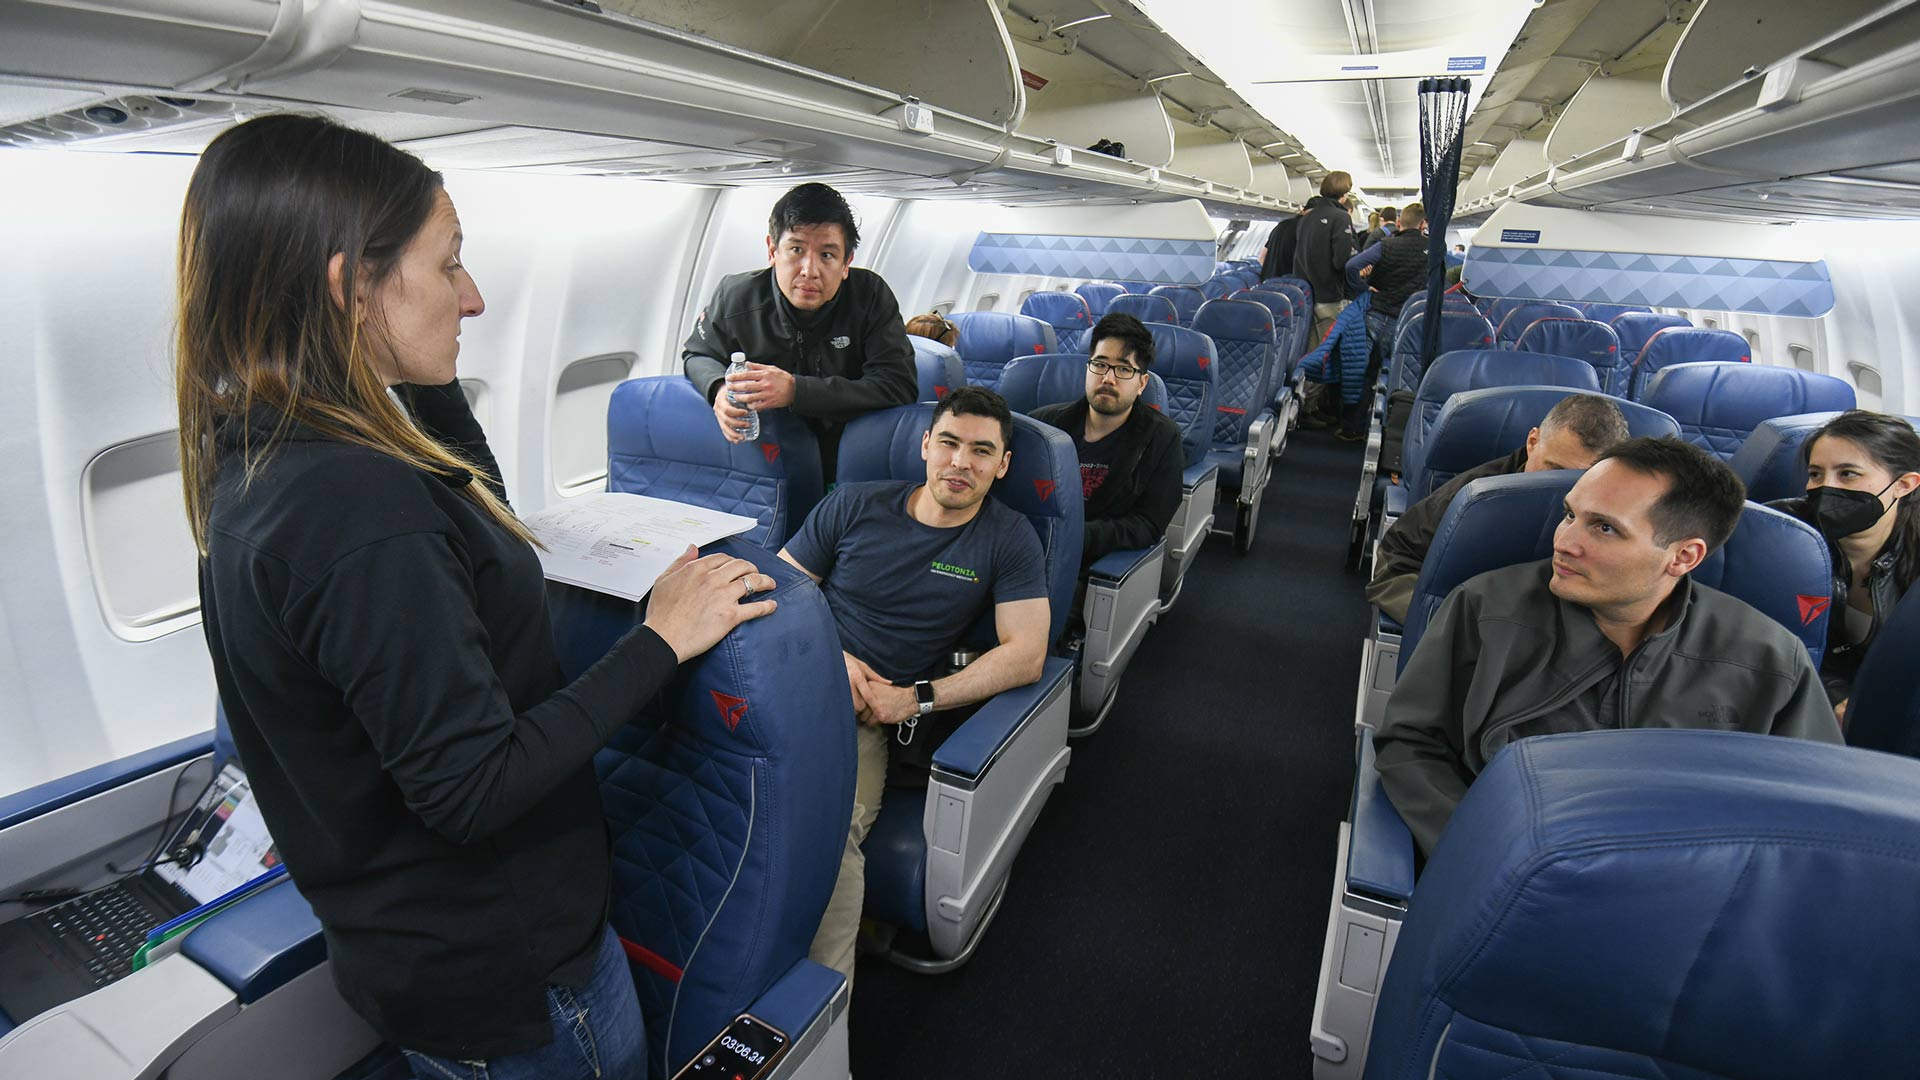 Students listening to their teacher on an airplane